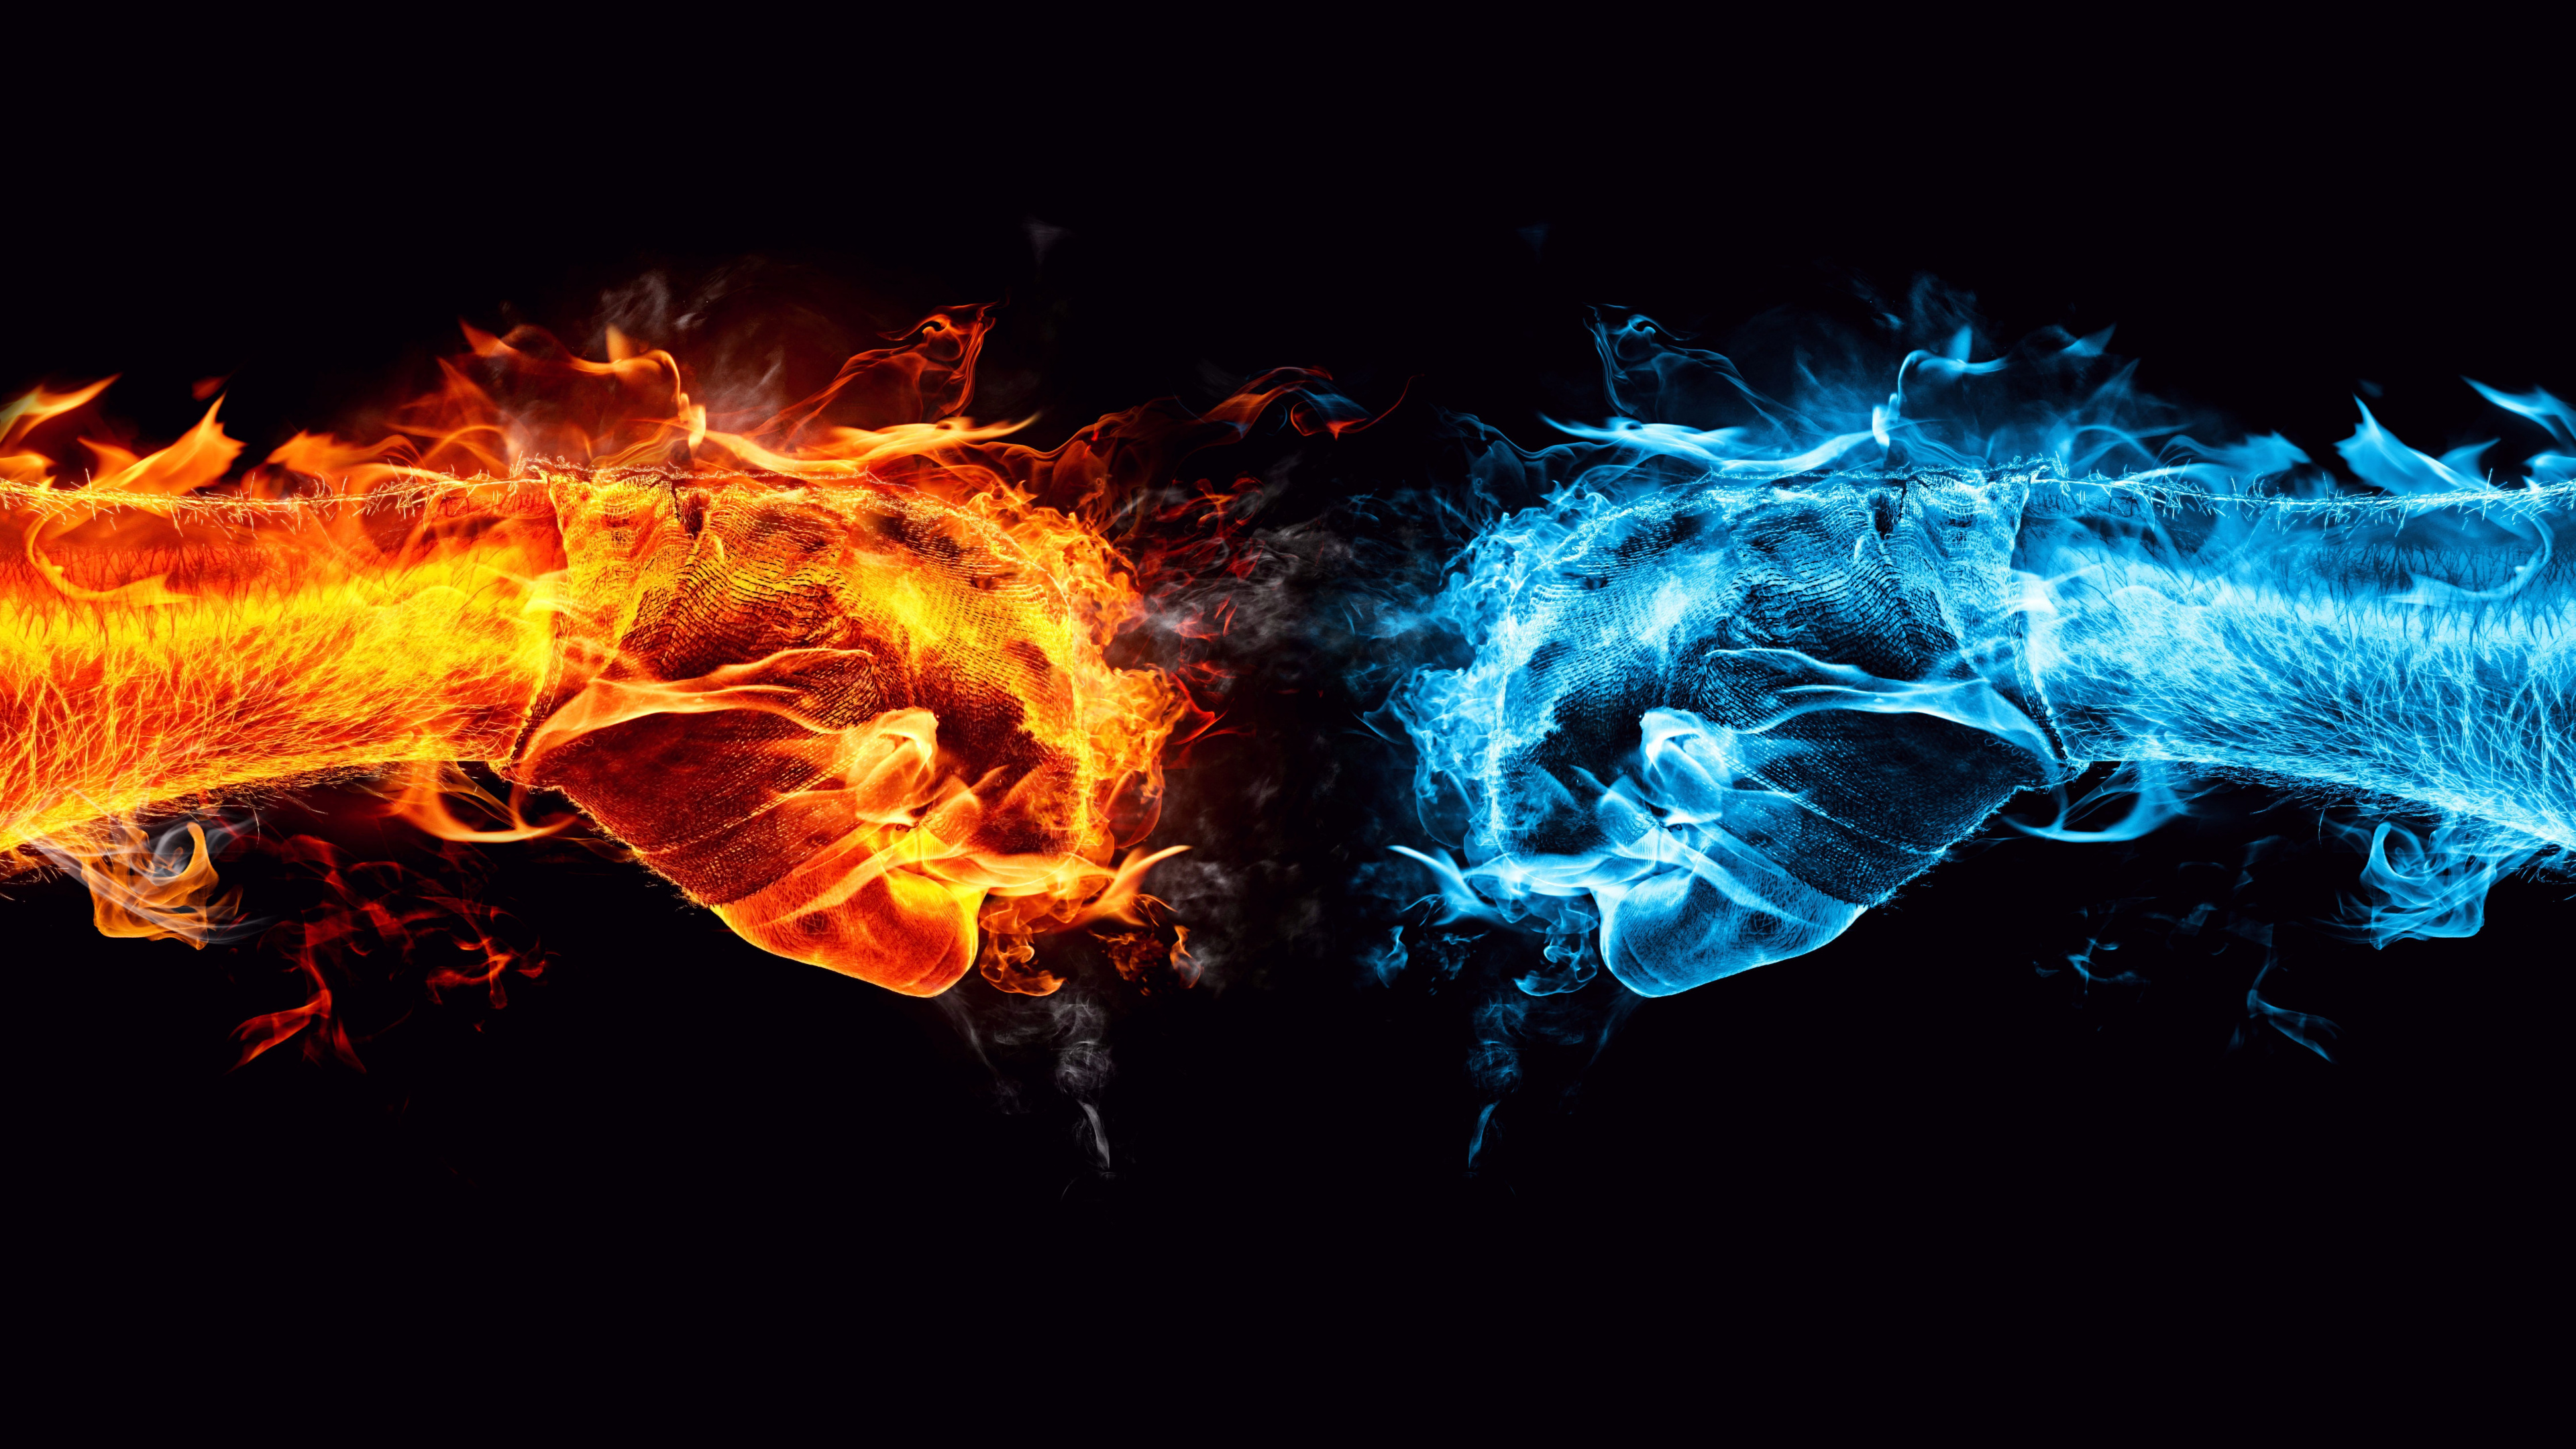 Blue and Orange Flame Illustration. Wallpaper in 3840x2160 Resolution